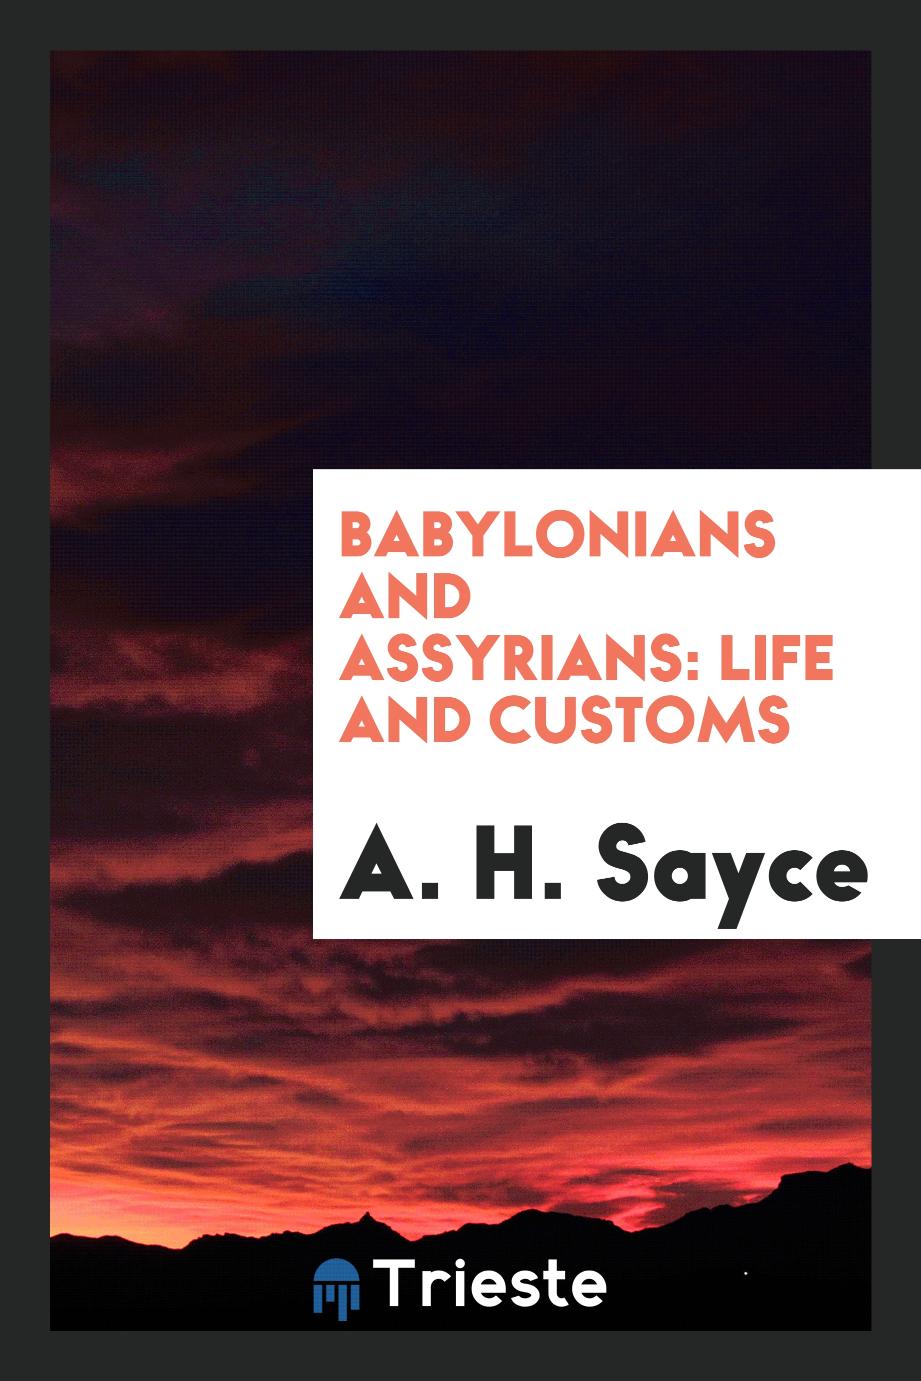 Babylonians and Assyrians: life and customs